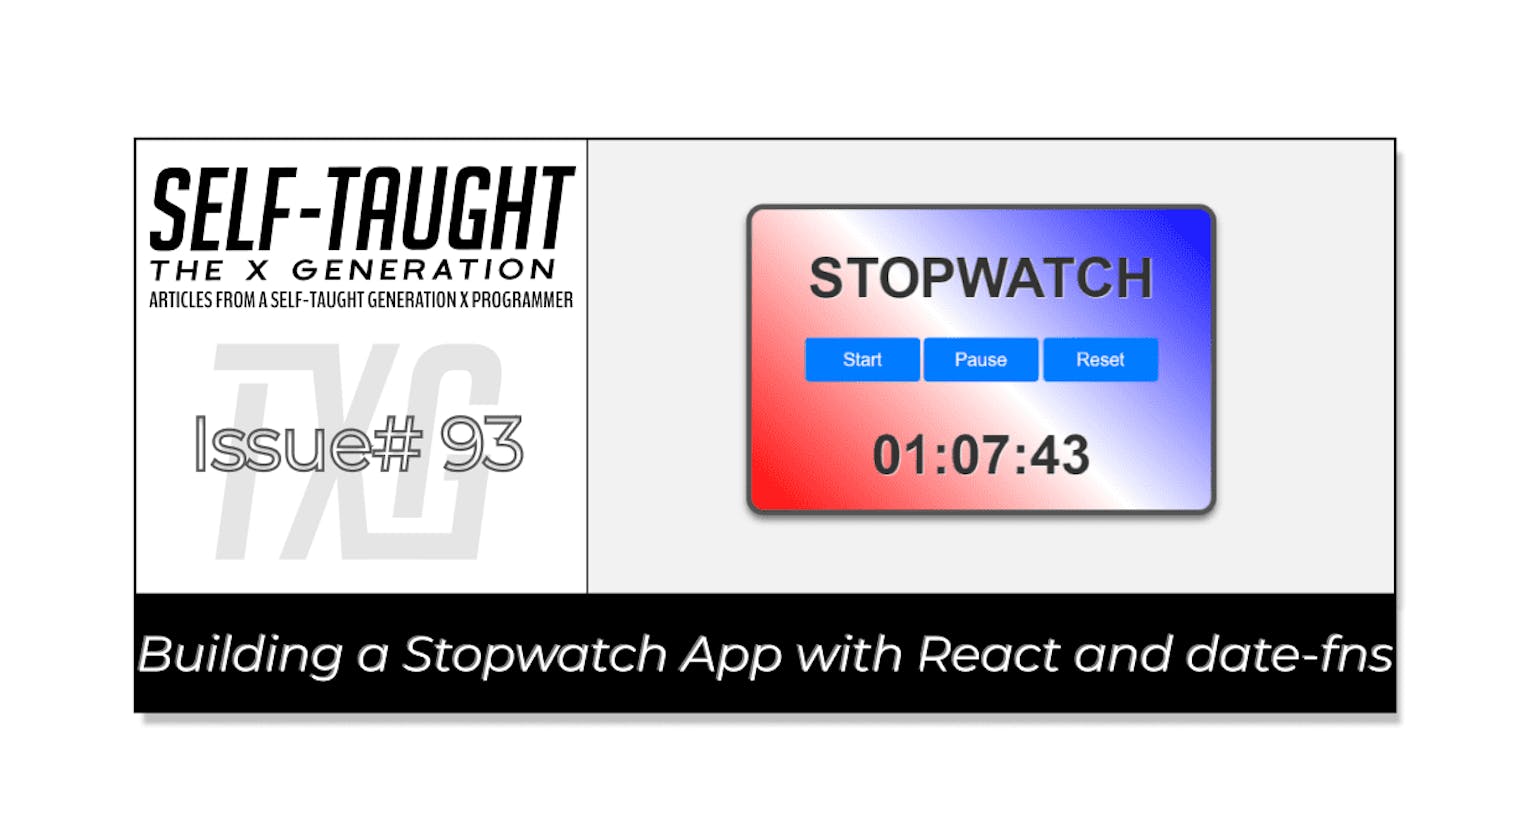 Building a Stopwatch App with React and date-fns